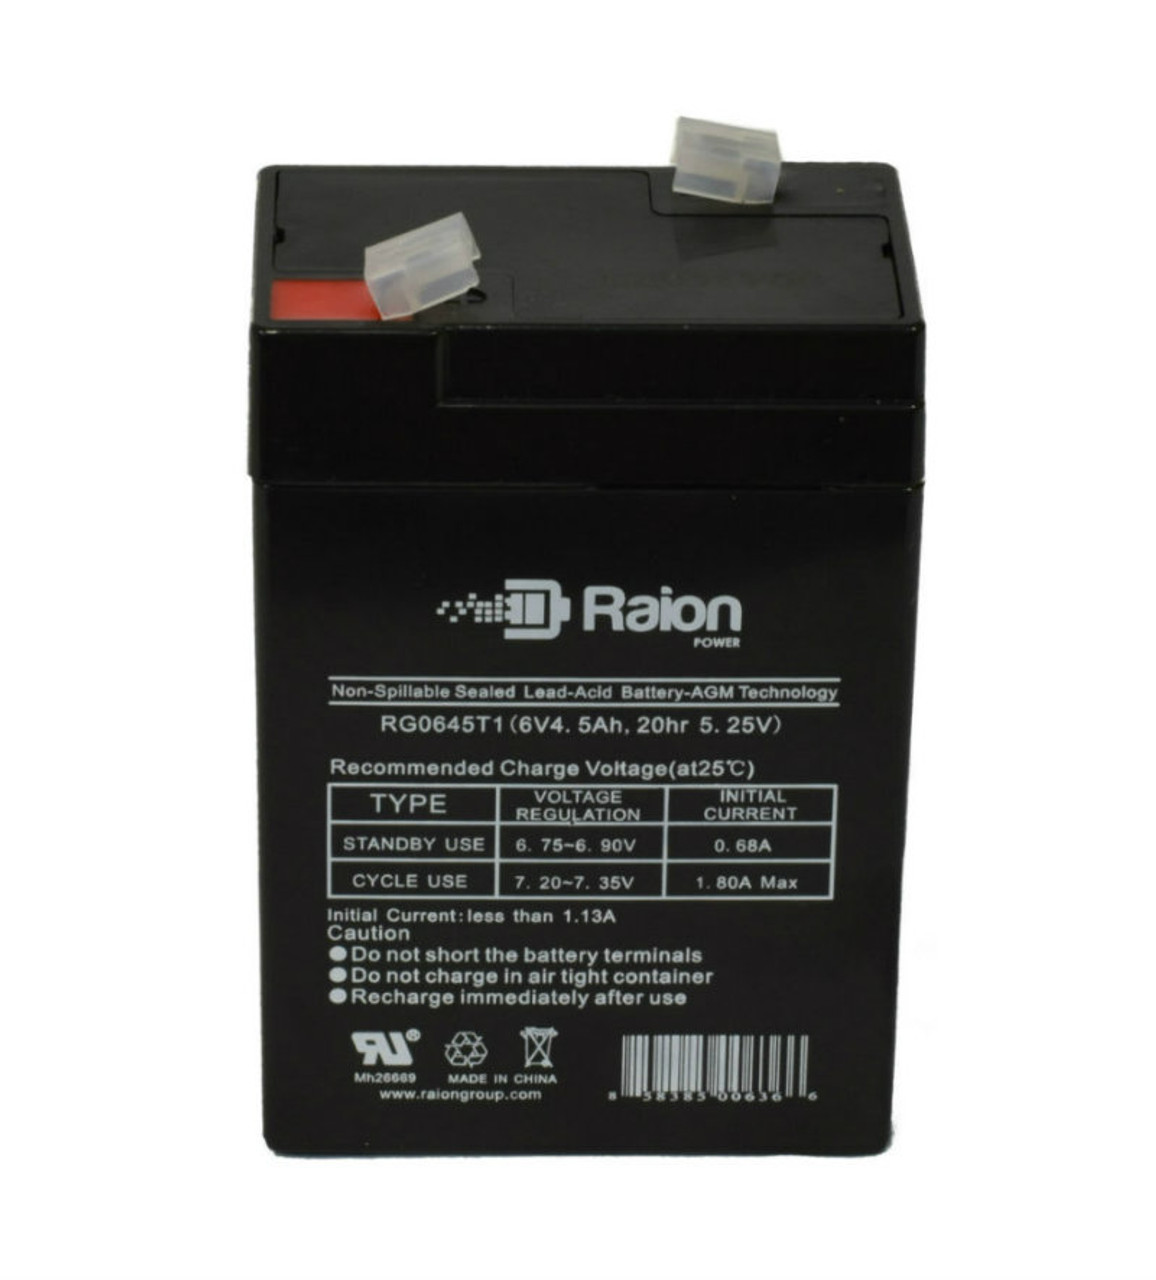 Raion Power RG0645T1 Replacement Battery Cartridge for Fuli FL645